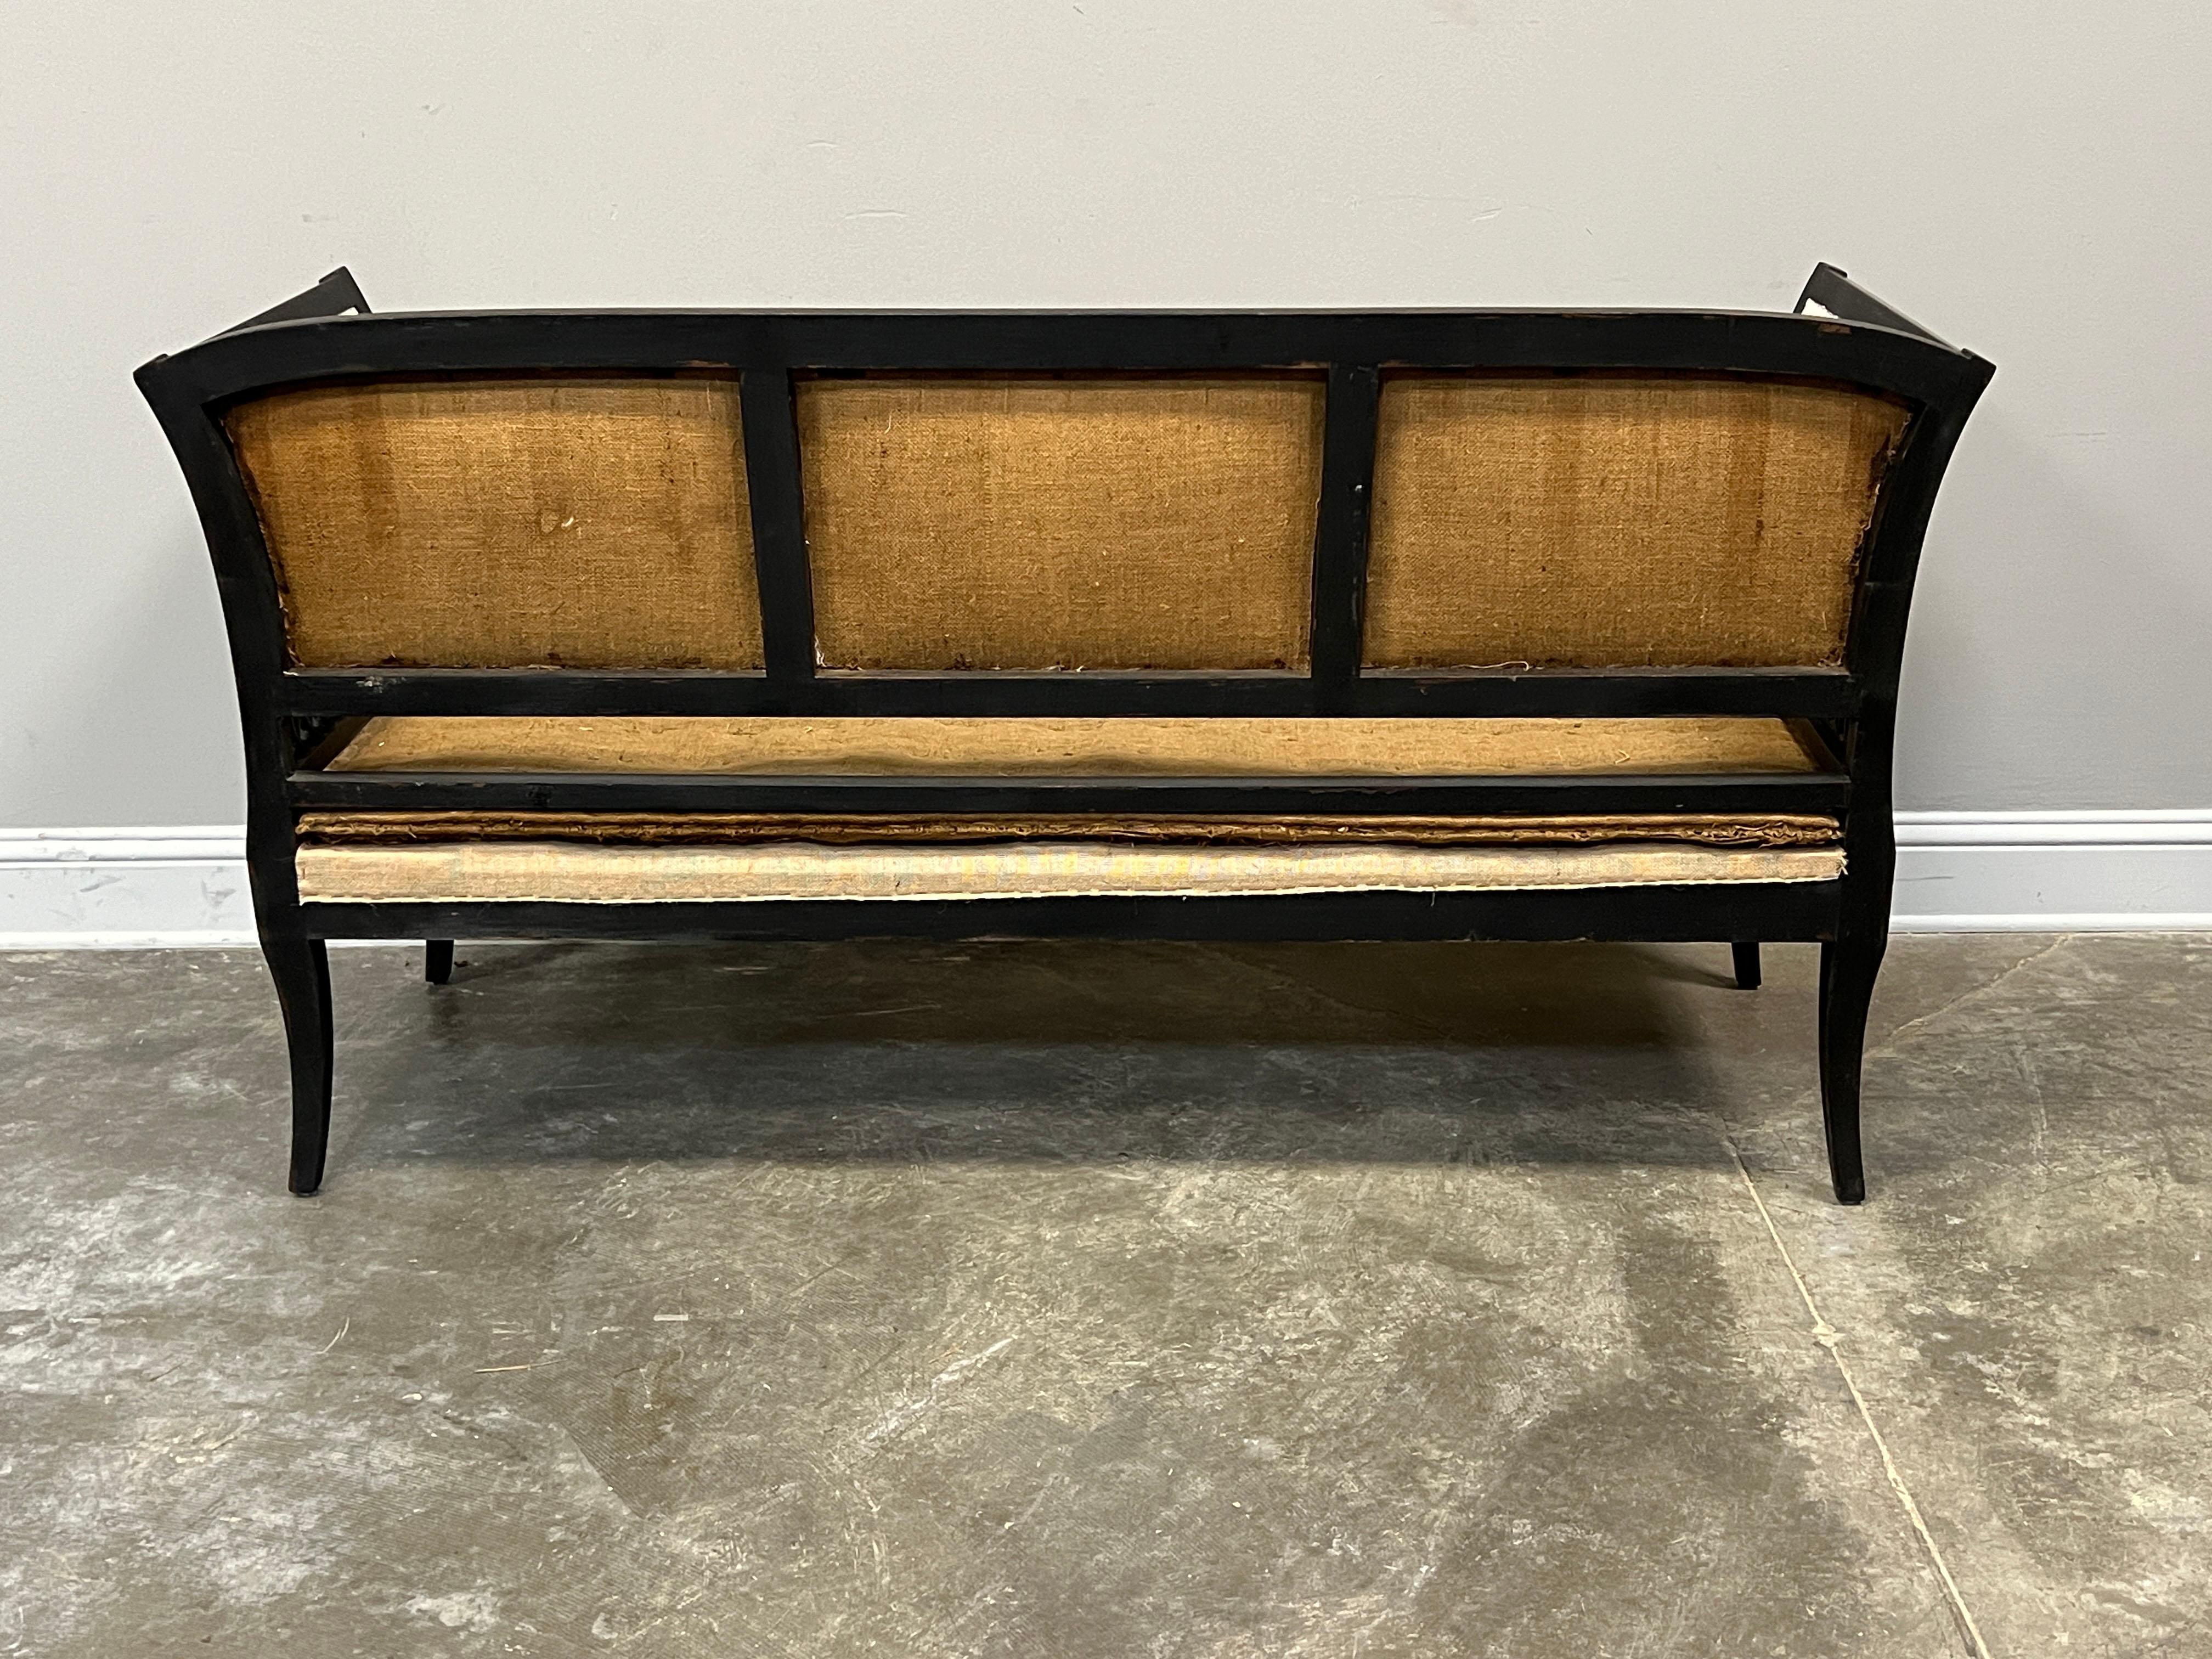 Early 19th Century Transition Directoire to Empire Style French Settee For Sale 3